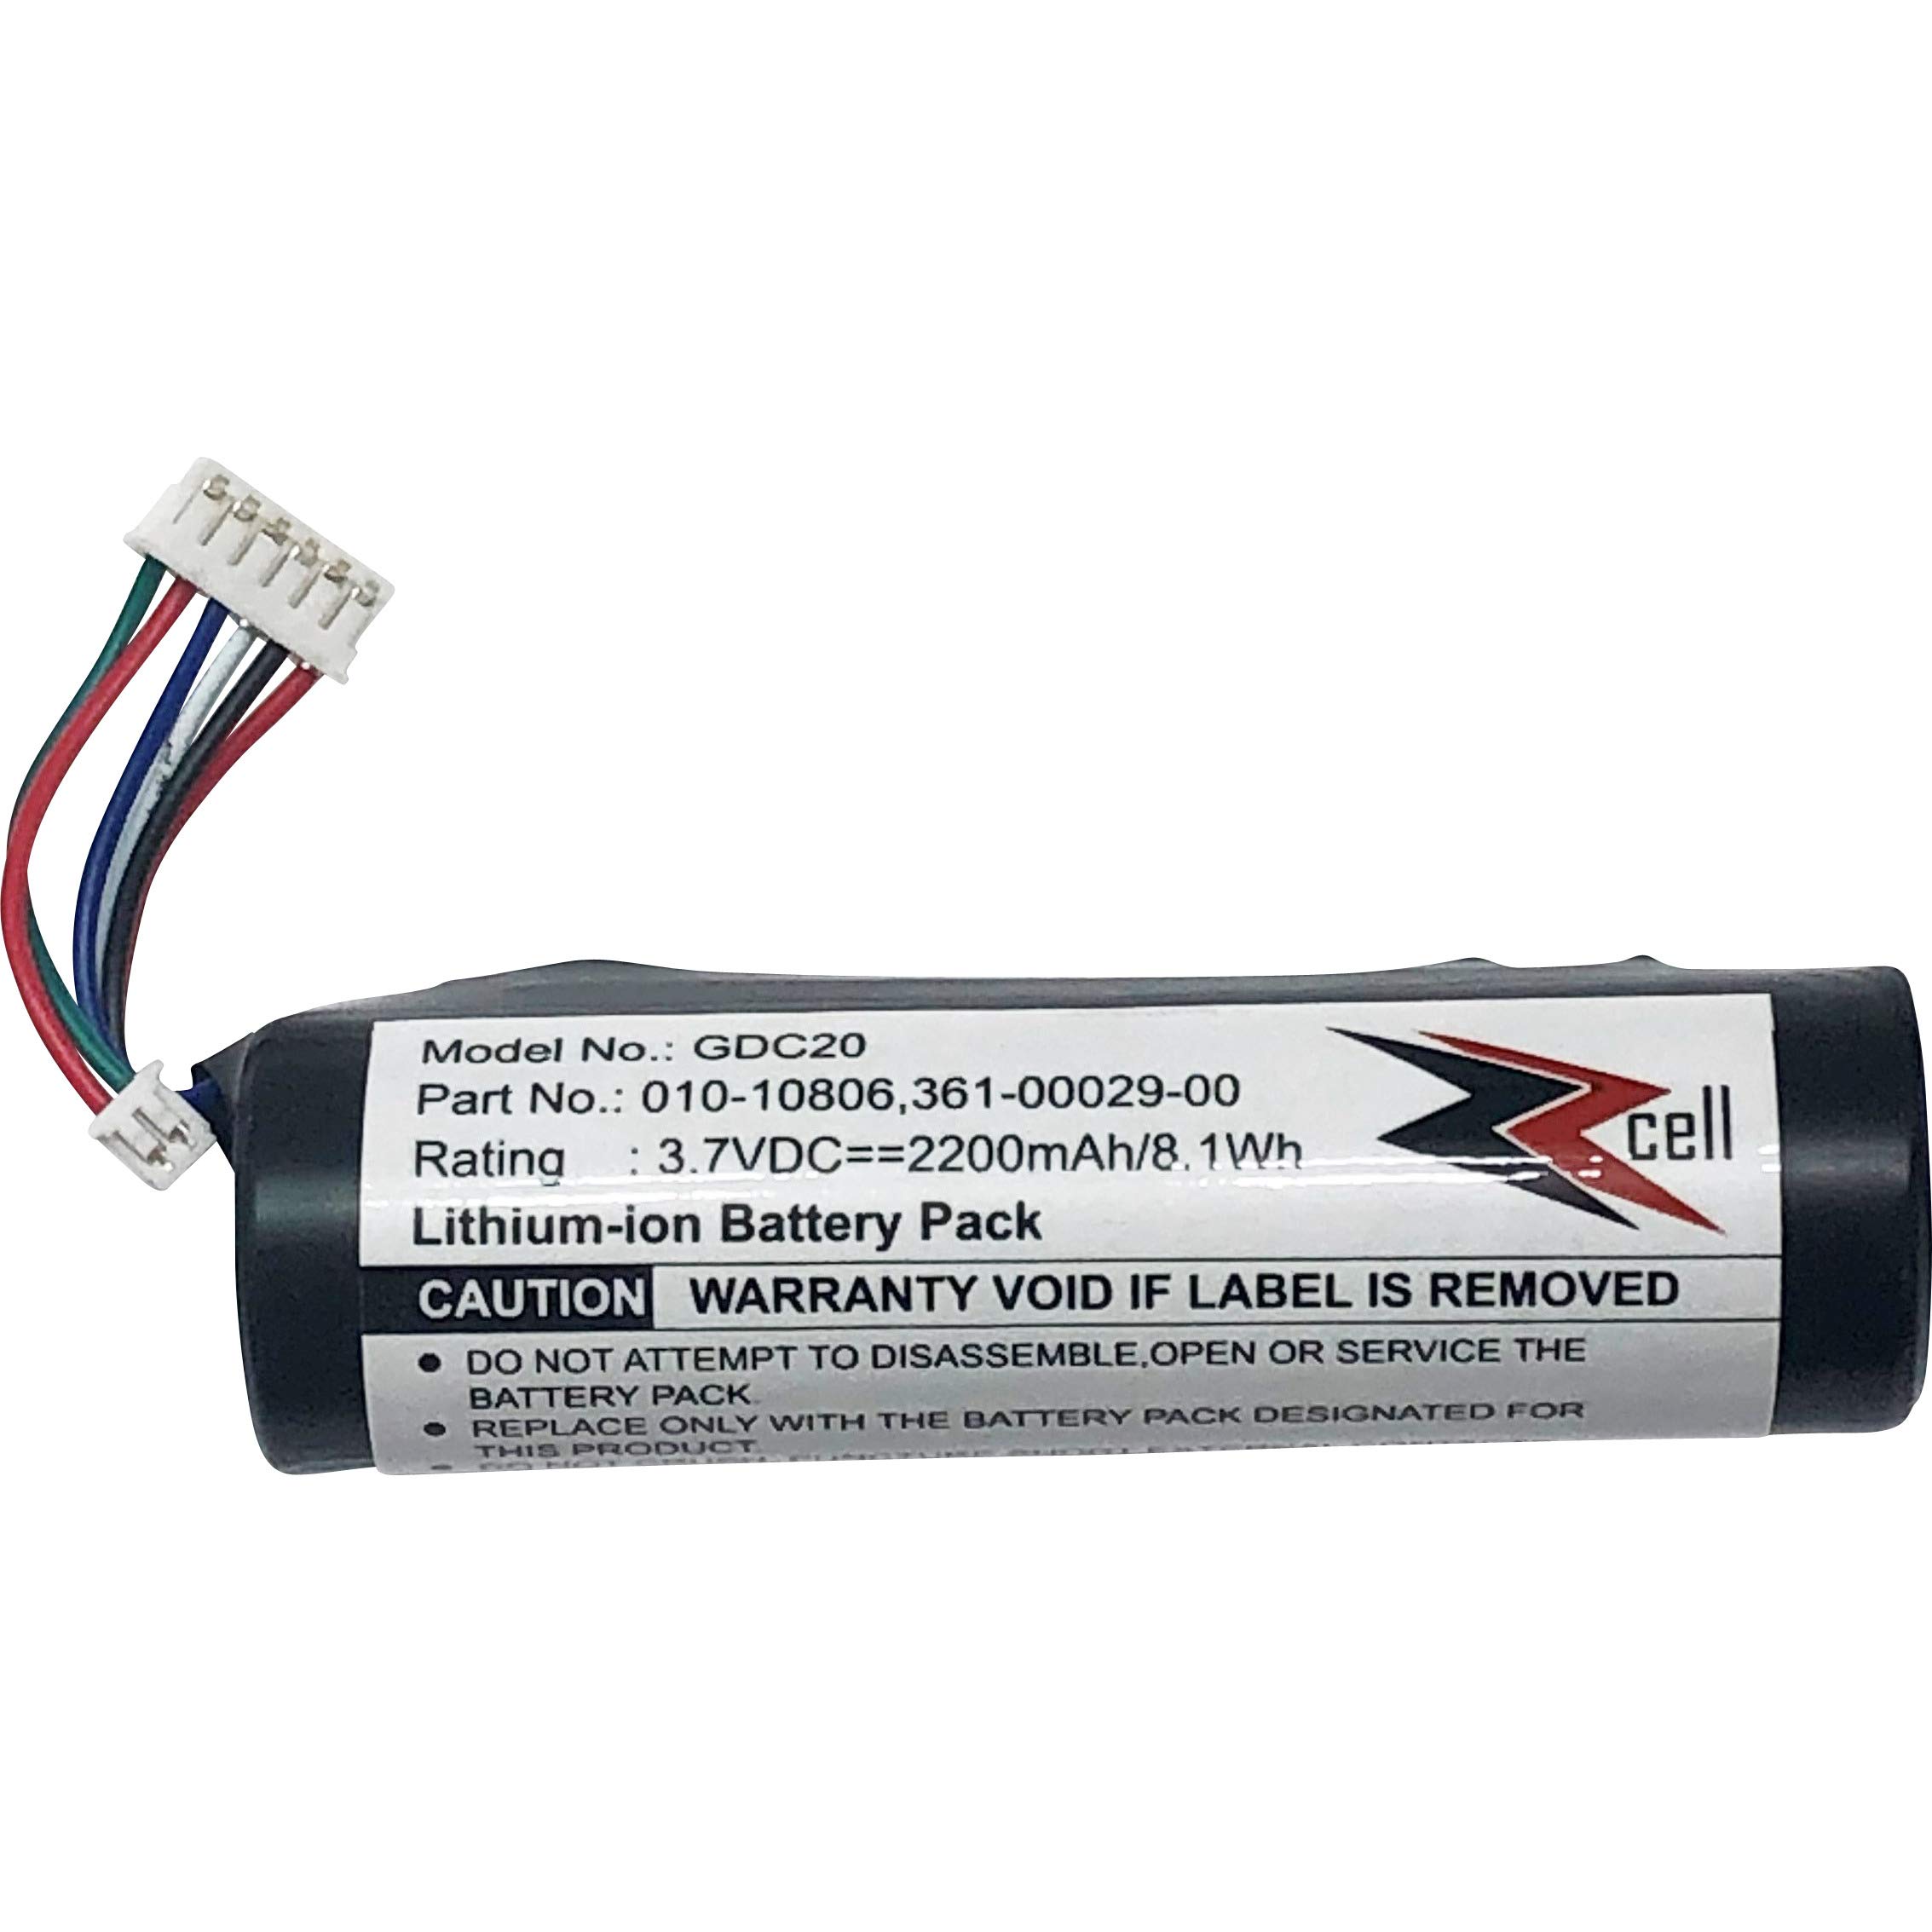 ZZcell Battery Replacement for Garmin DC20 DC30 DC40, 010-10806-00, 010-10806-01, 010-10806-20, 361-00029-00 Astro System DC20 Dog Tracking DC 20 GPS